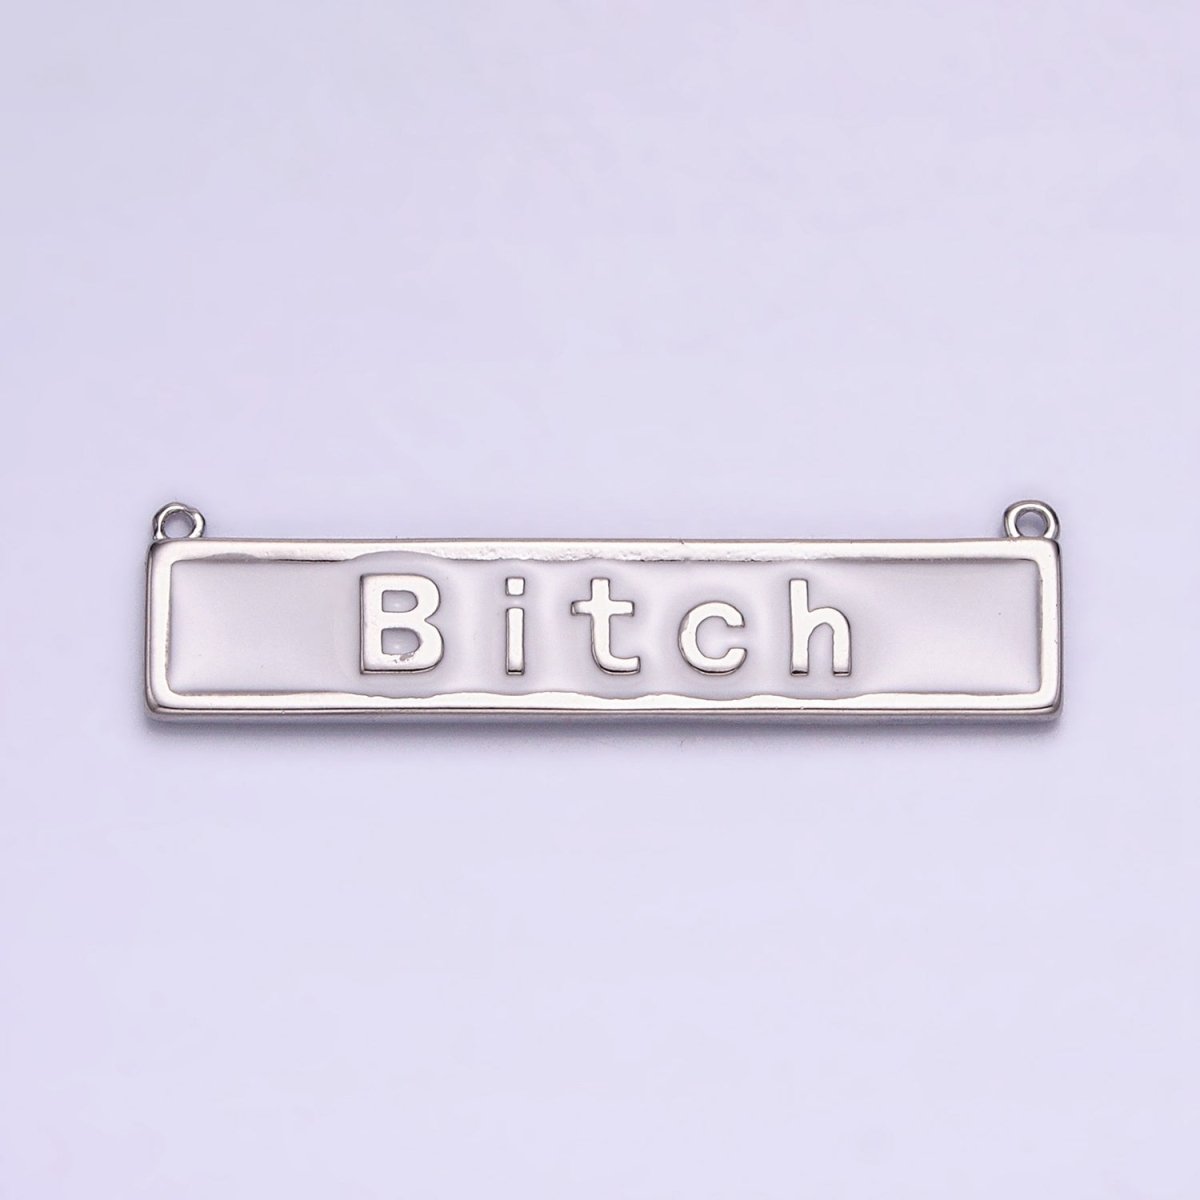 Bitch Word Charm Connectors Pendants in Gold Silver For Funny Novelty Necklace Component AA931 AA932 AA933 AA934 - DLUXCA